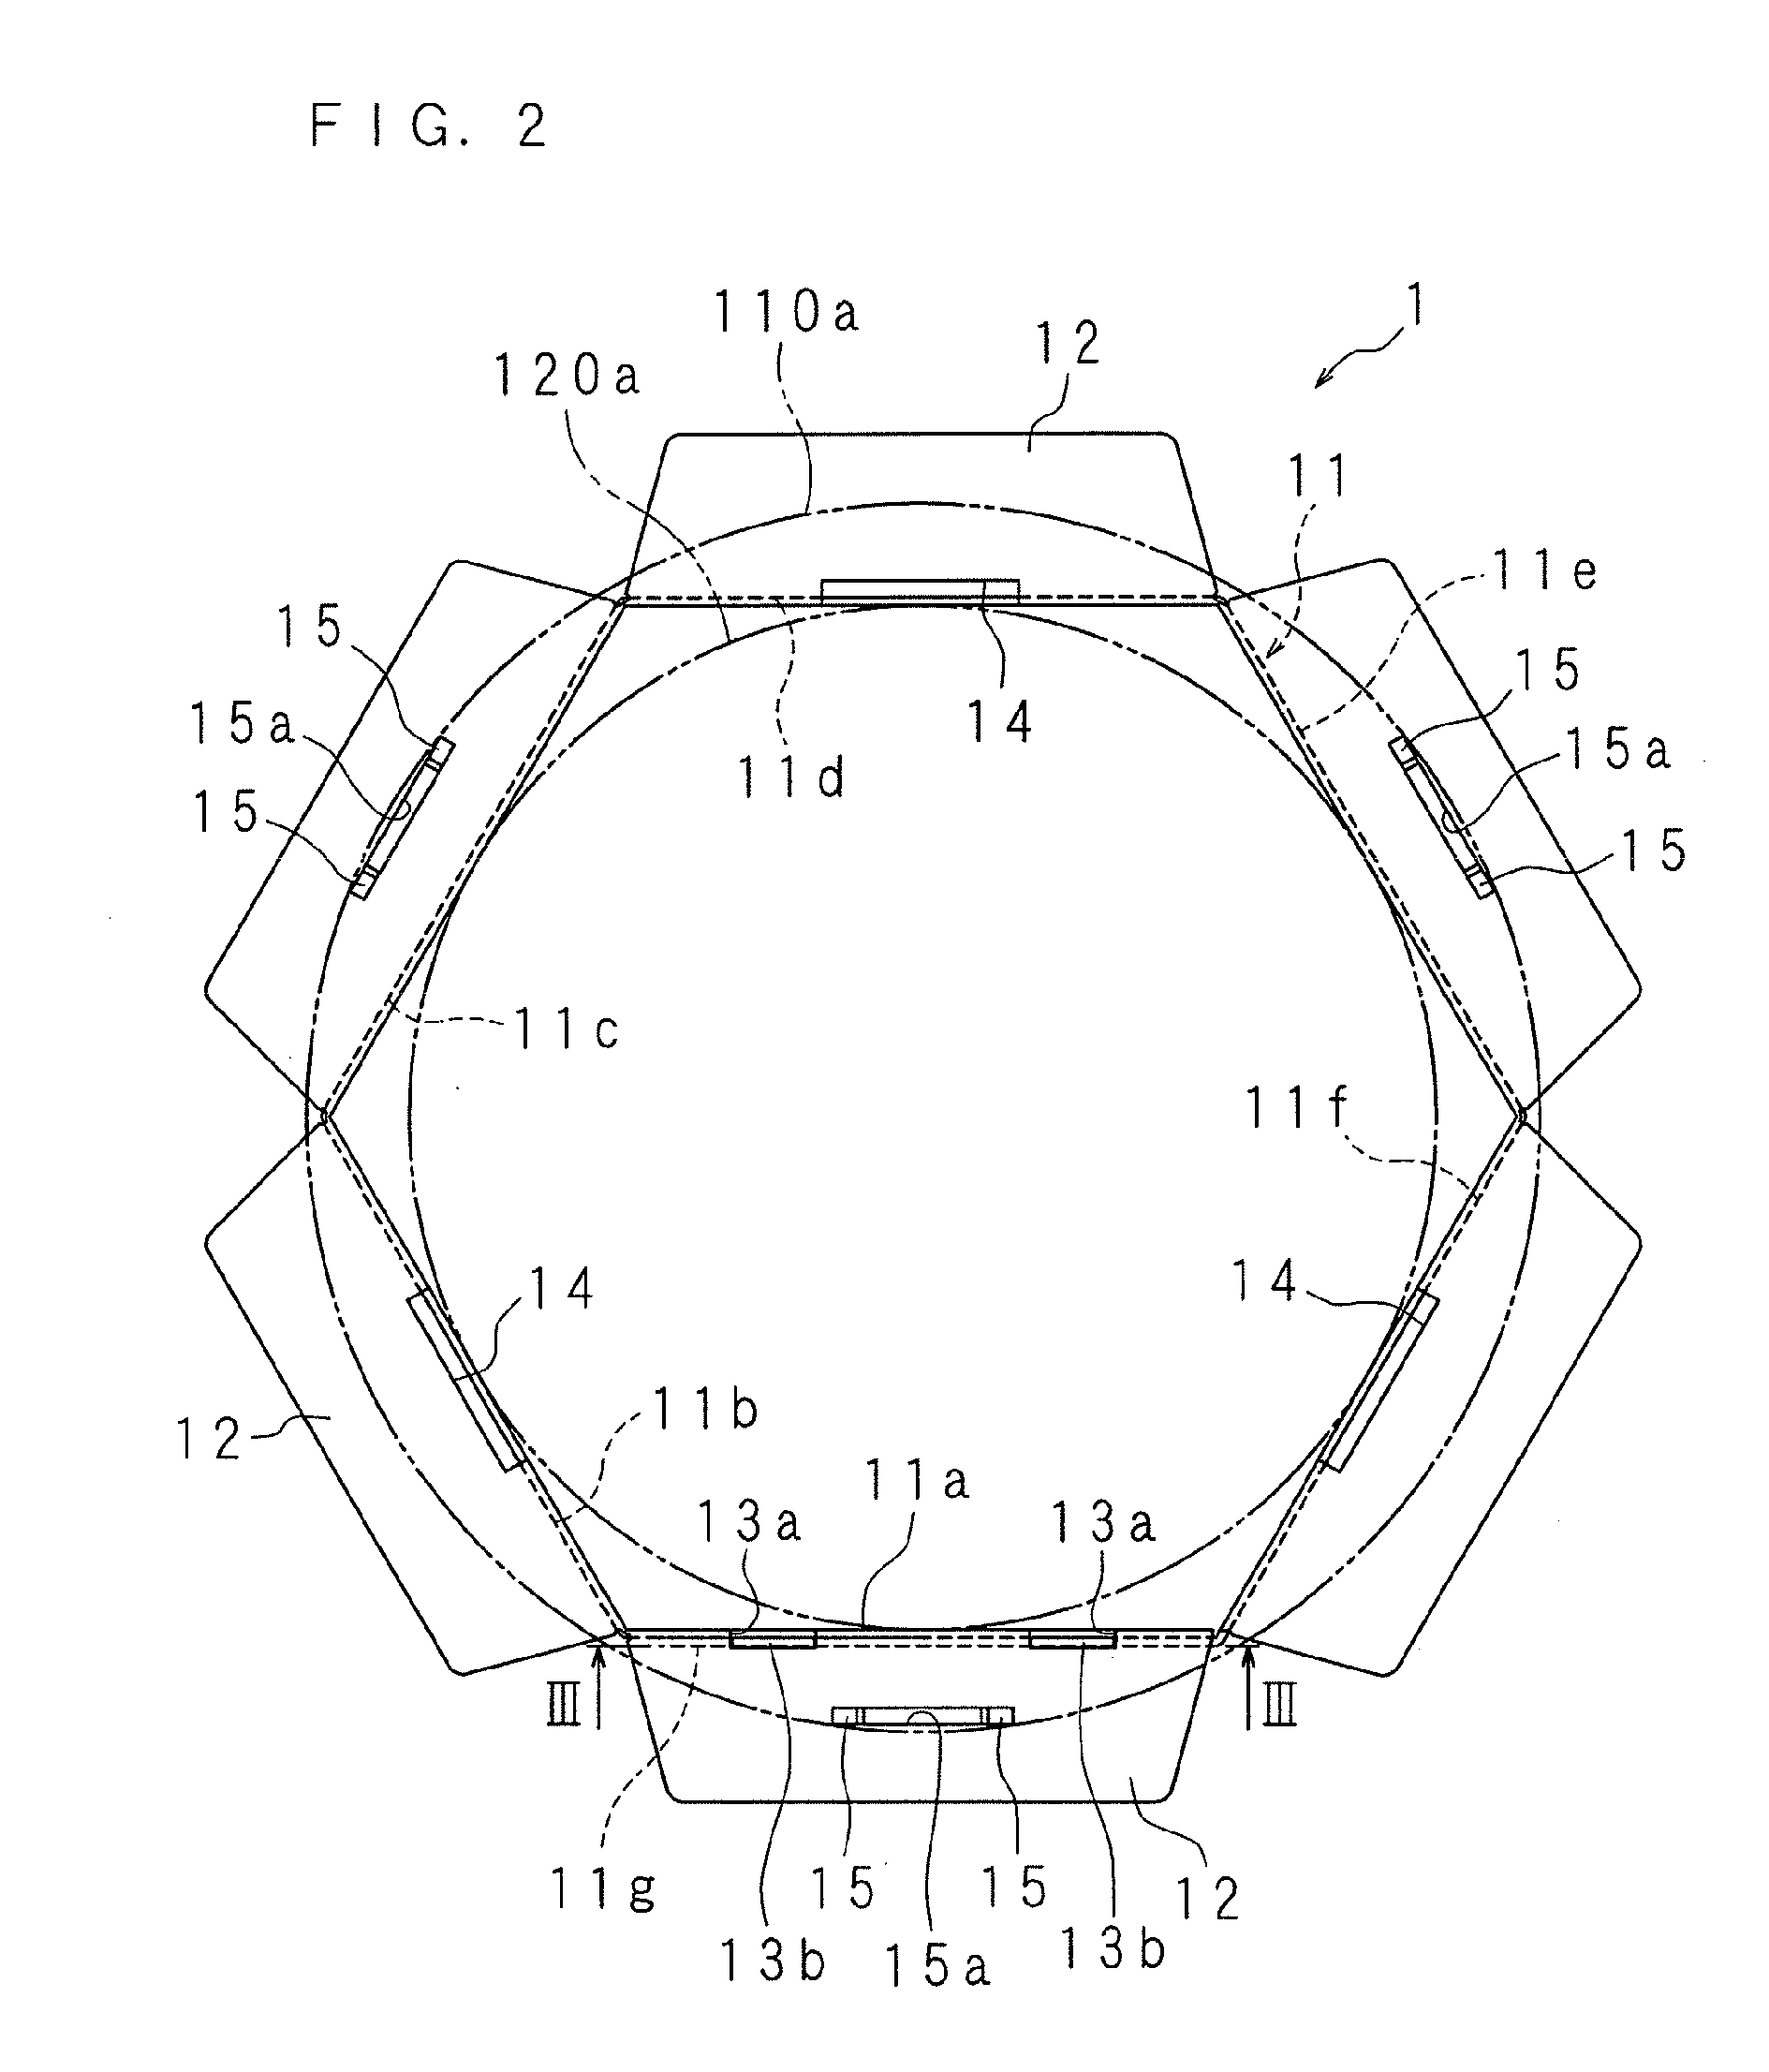 Mounting assisting member and lighting apparatus